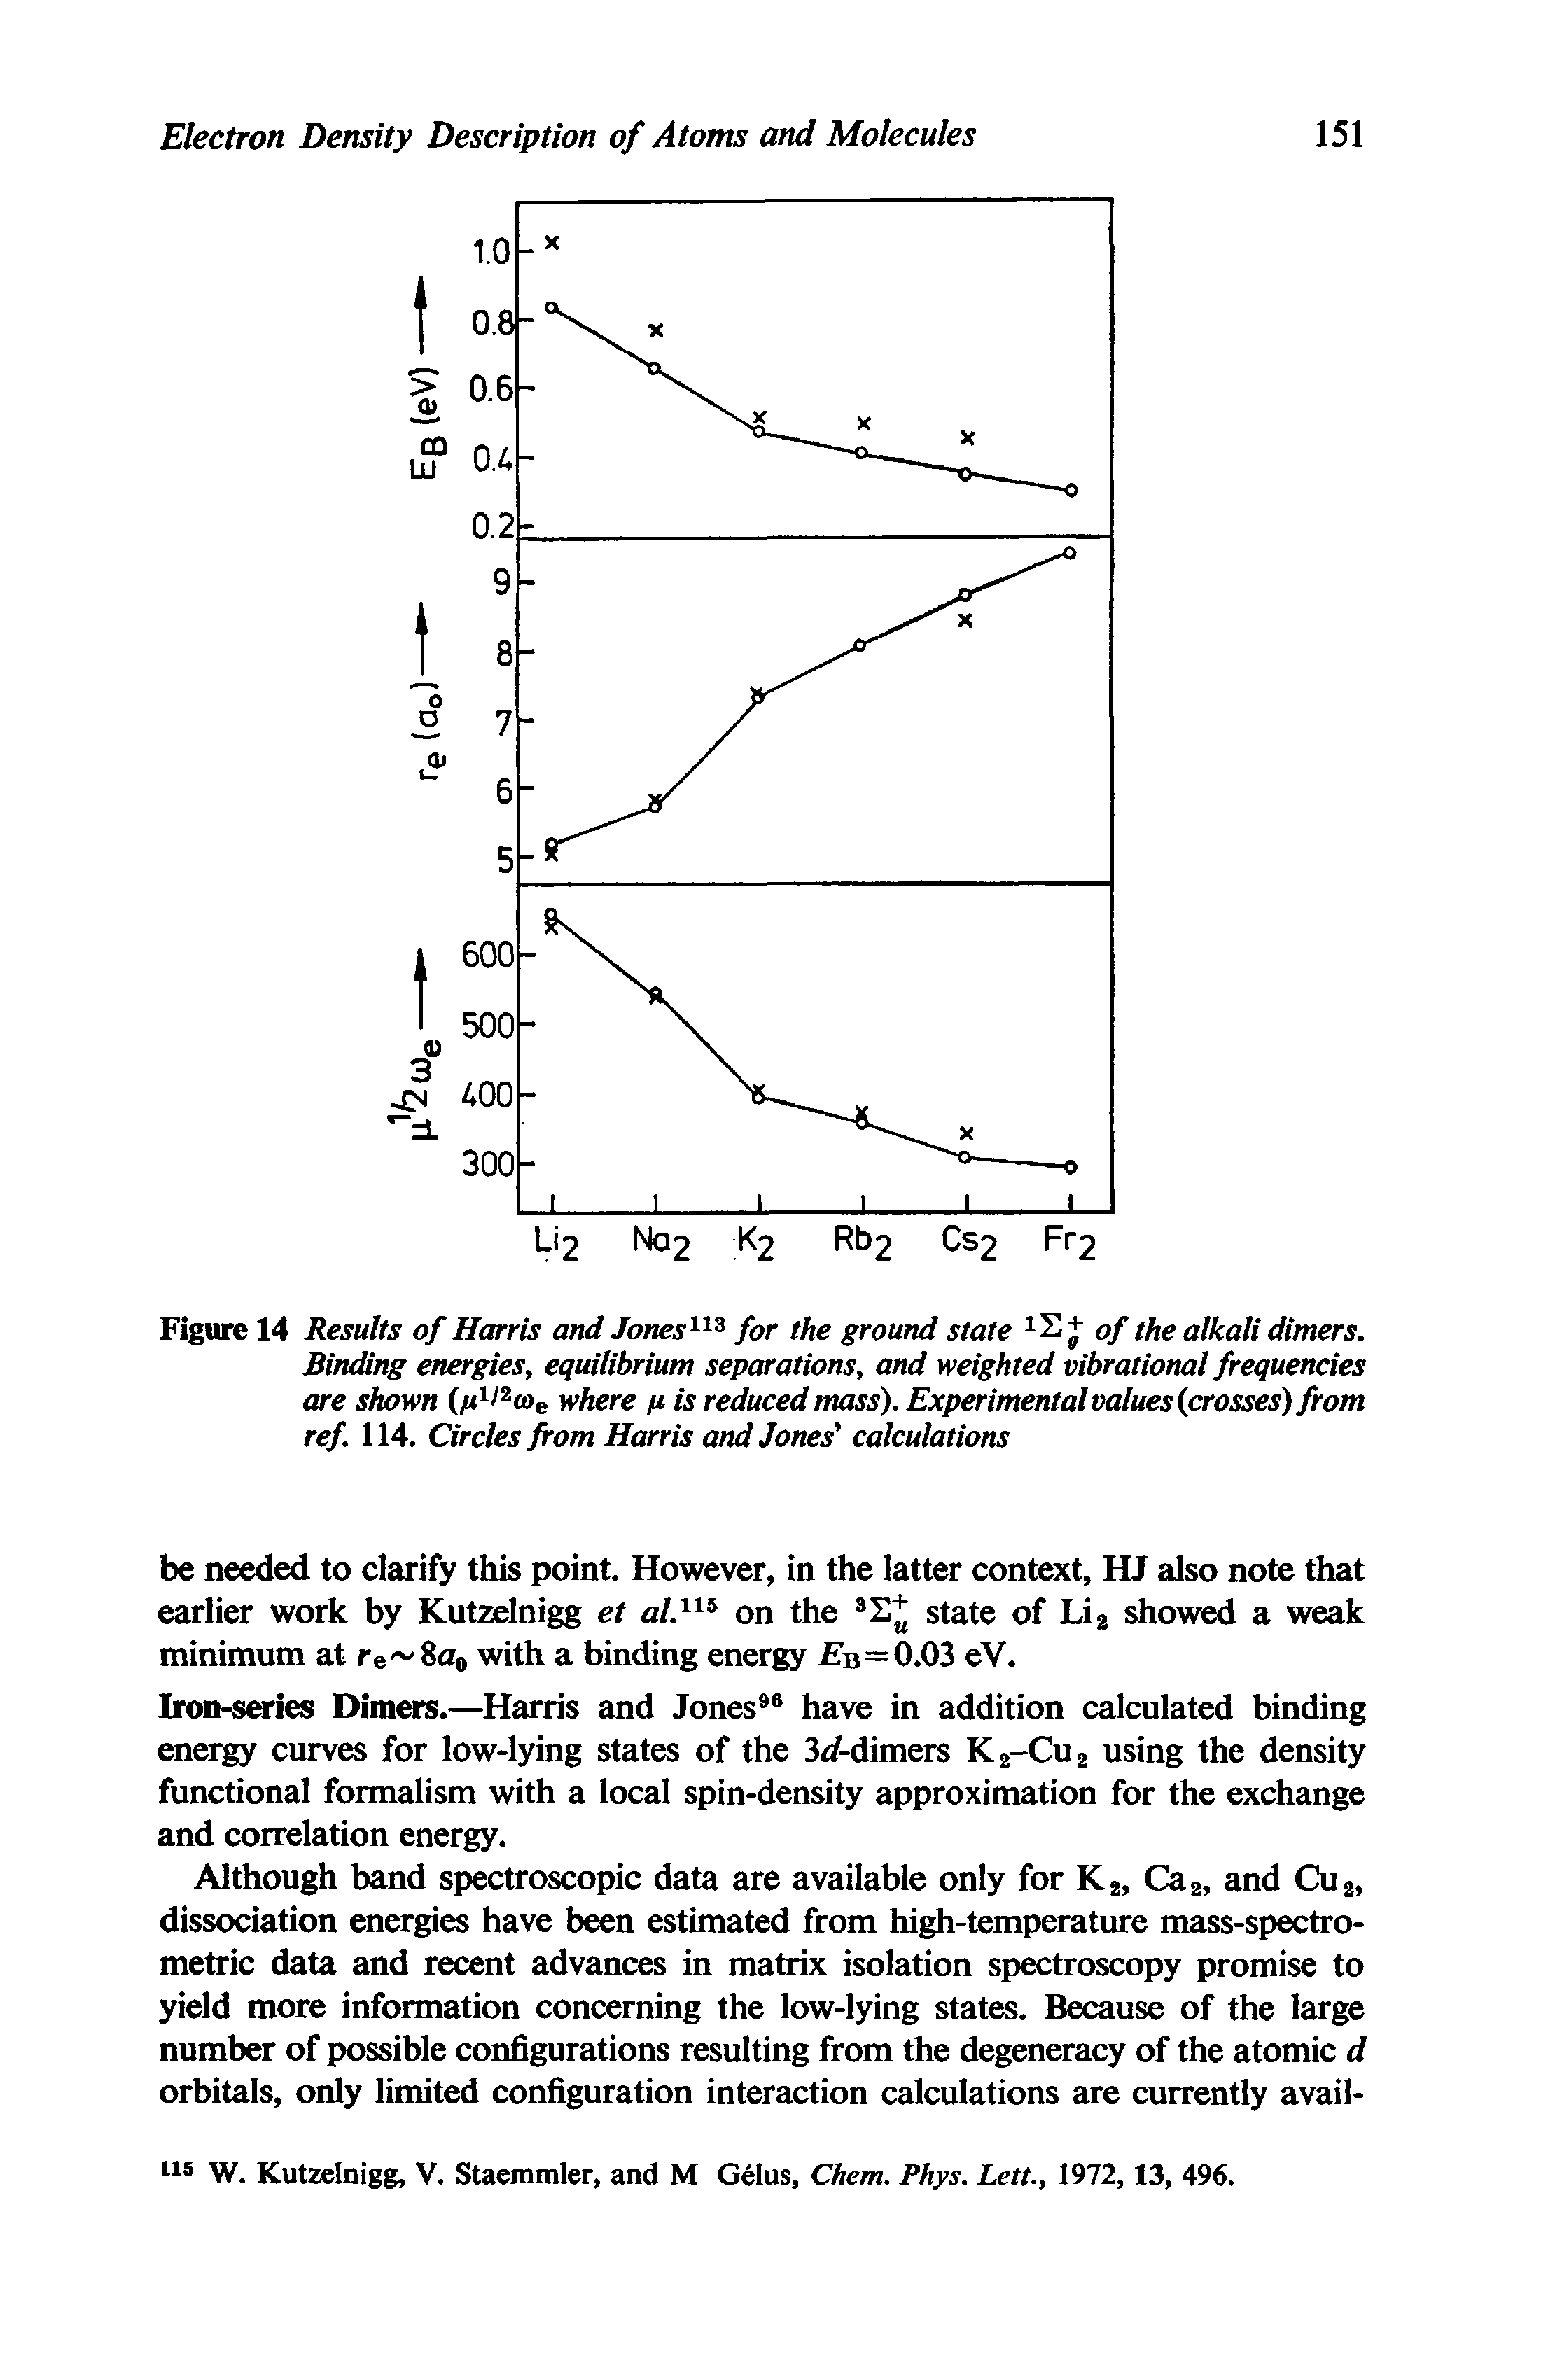 Figure 14 Results of Harris and Jones113 for the ground state x2+ of the alkali dimers.